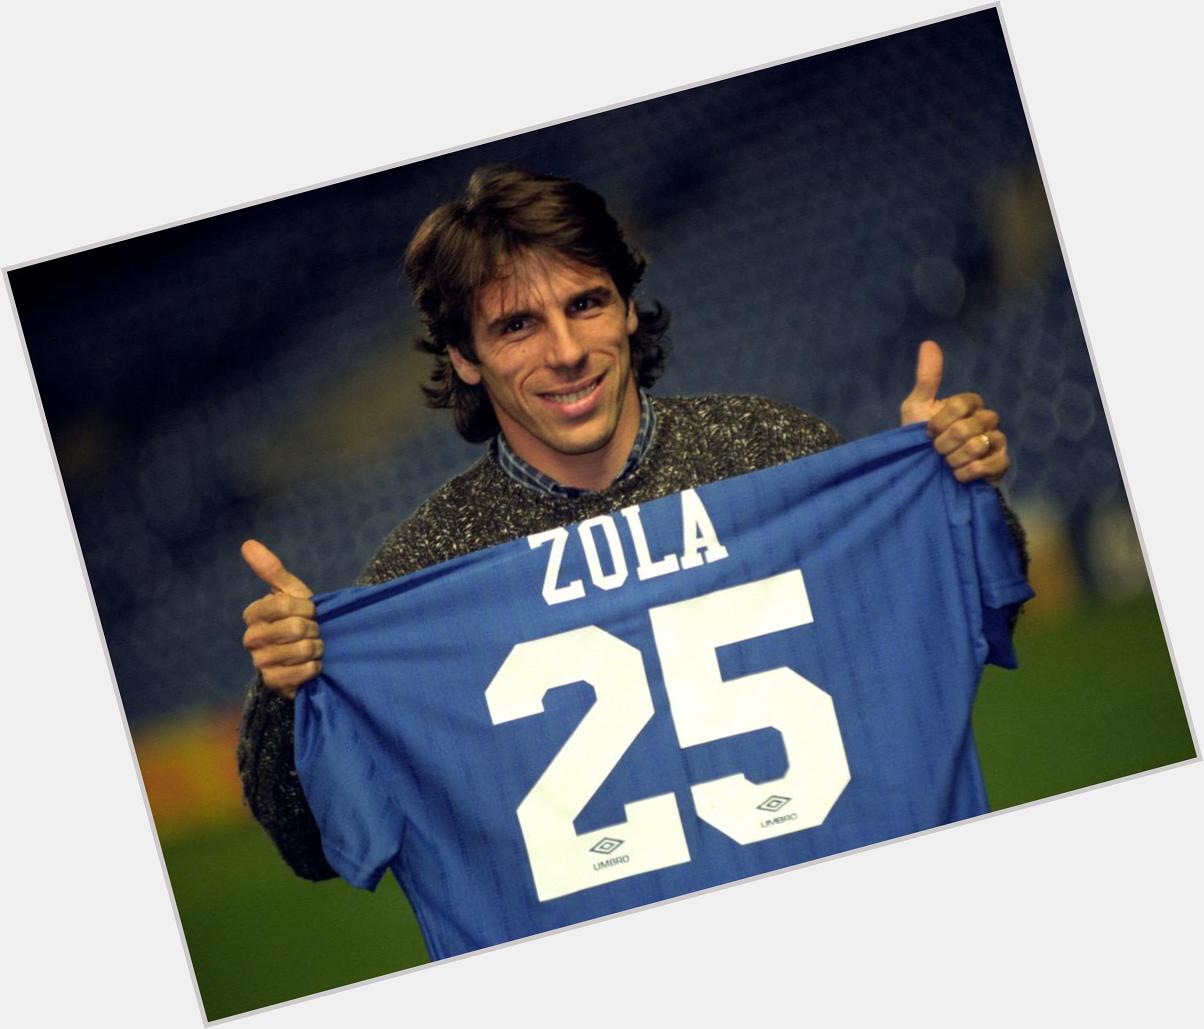 Happy Birthday to Chelsea Legend Gianfranco Zola, my favourite player growing up  